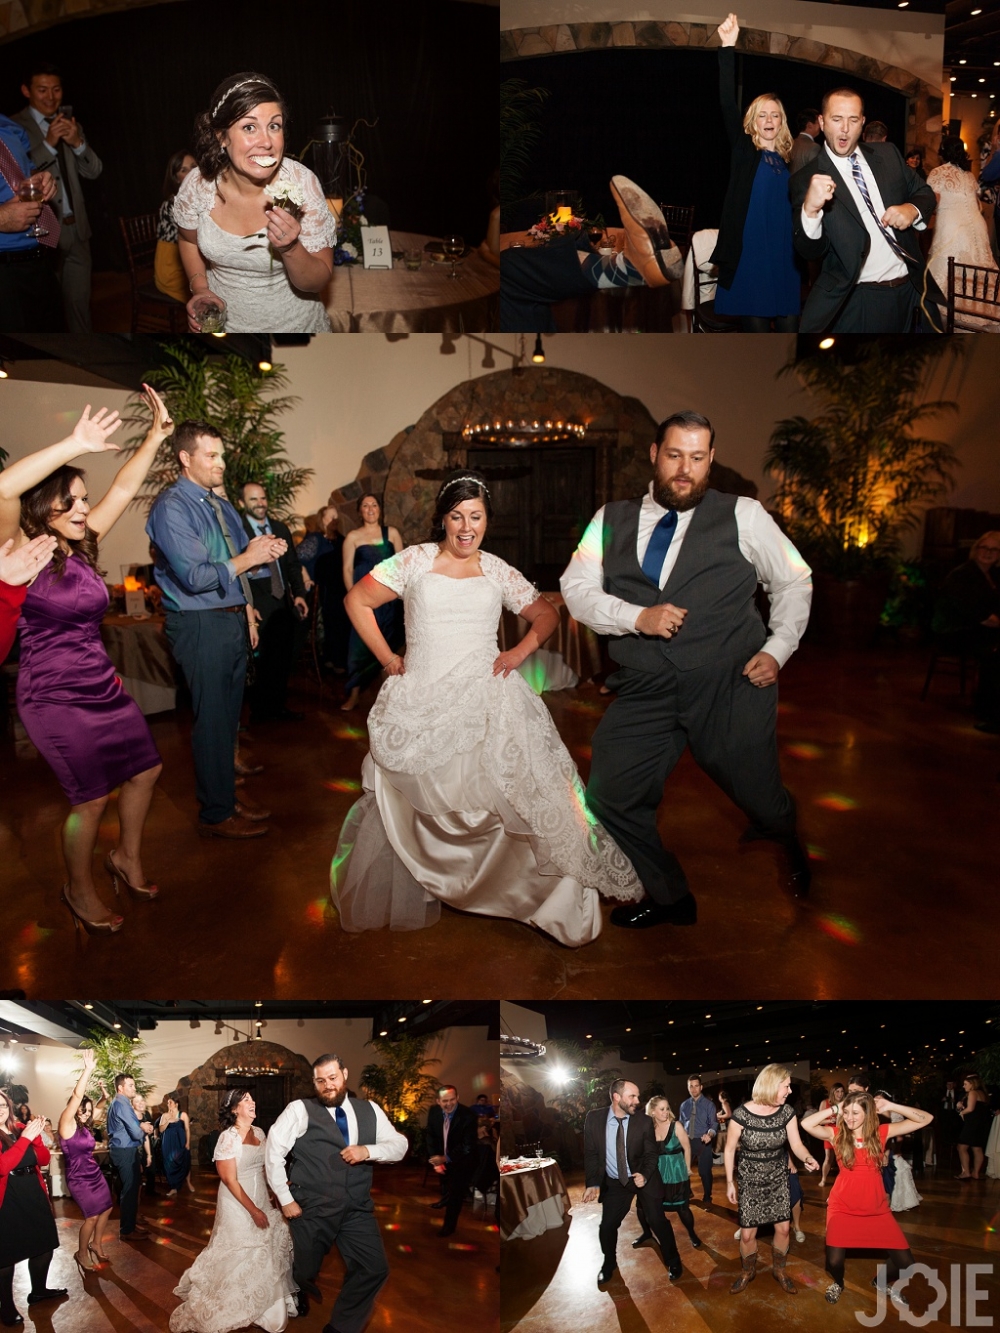 Wedding at Agave Real by Joie Photographie Katy